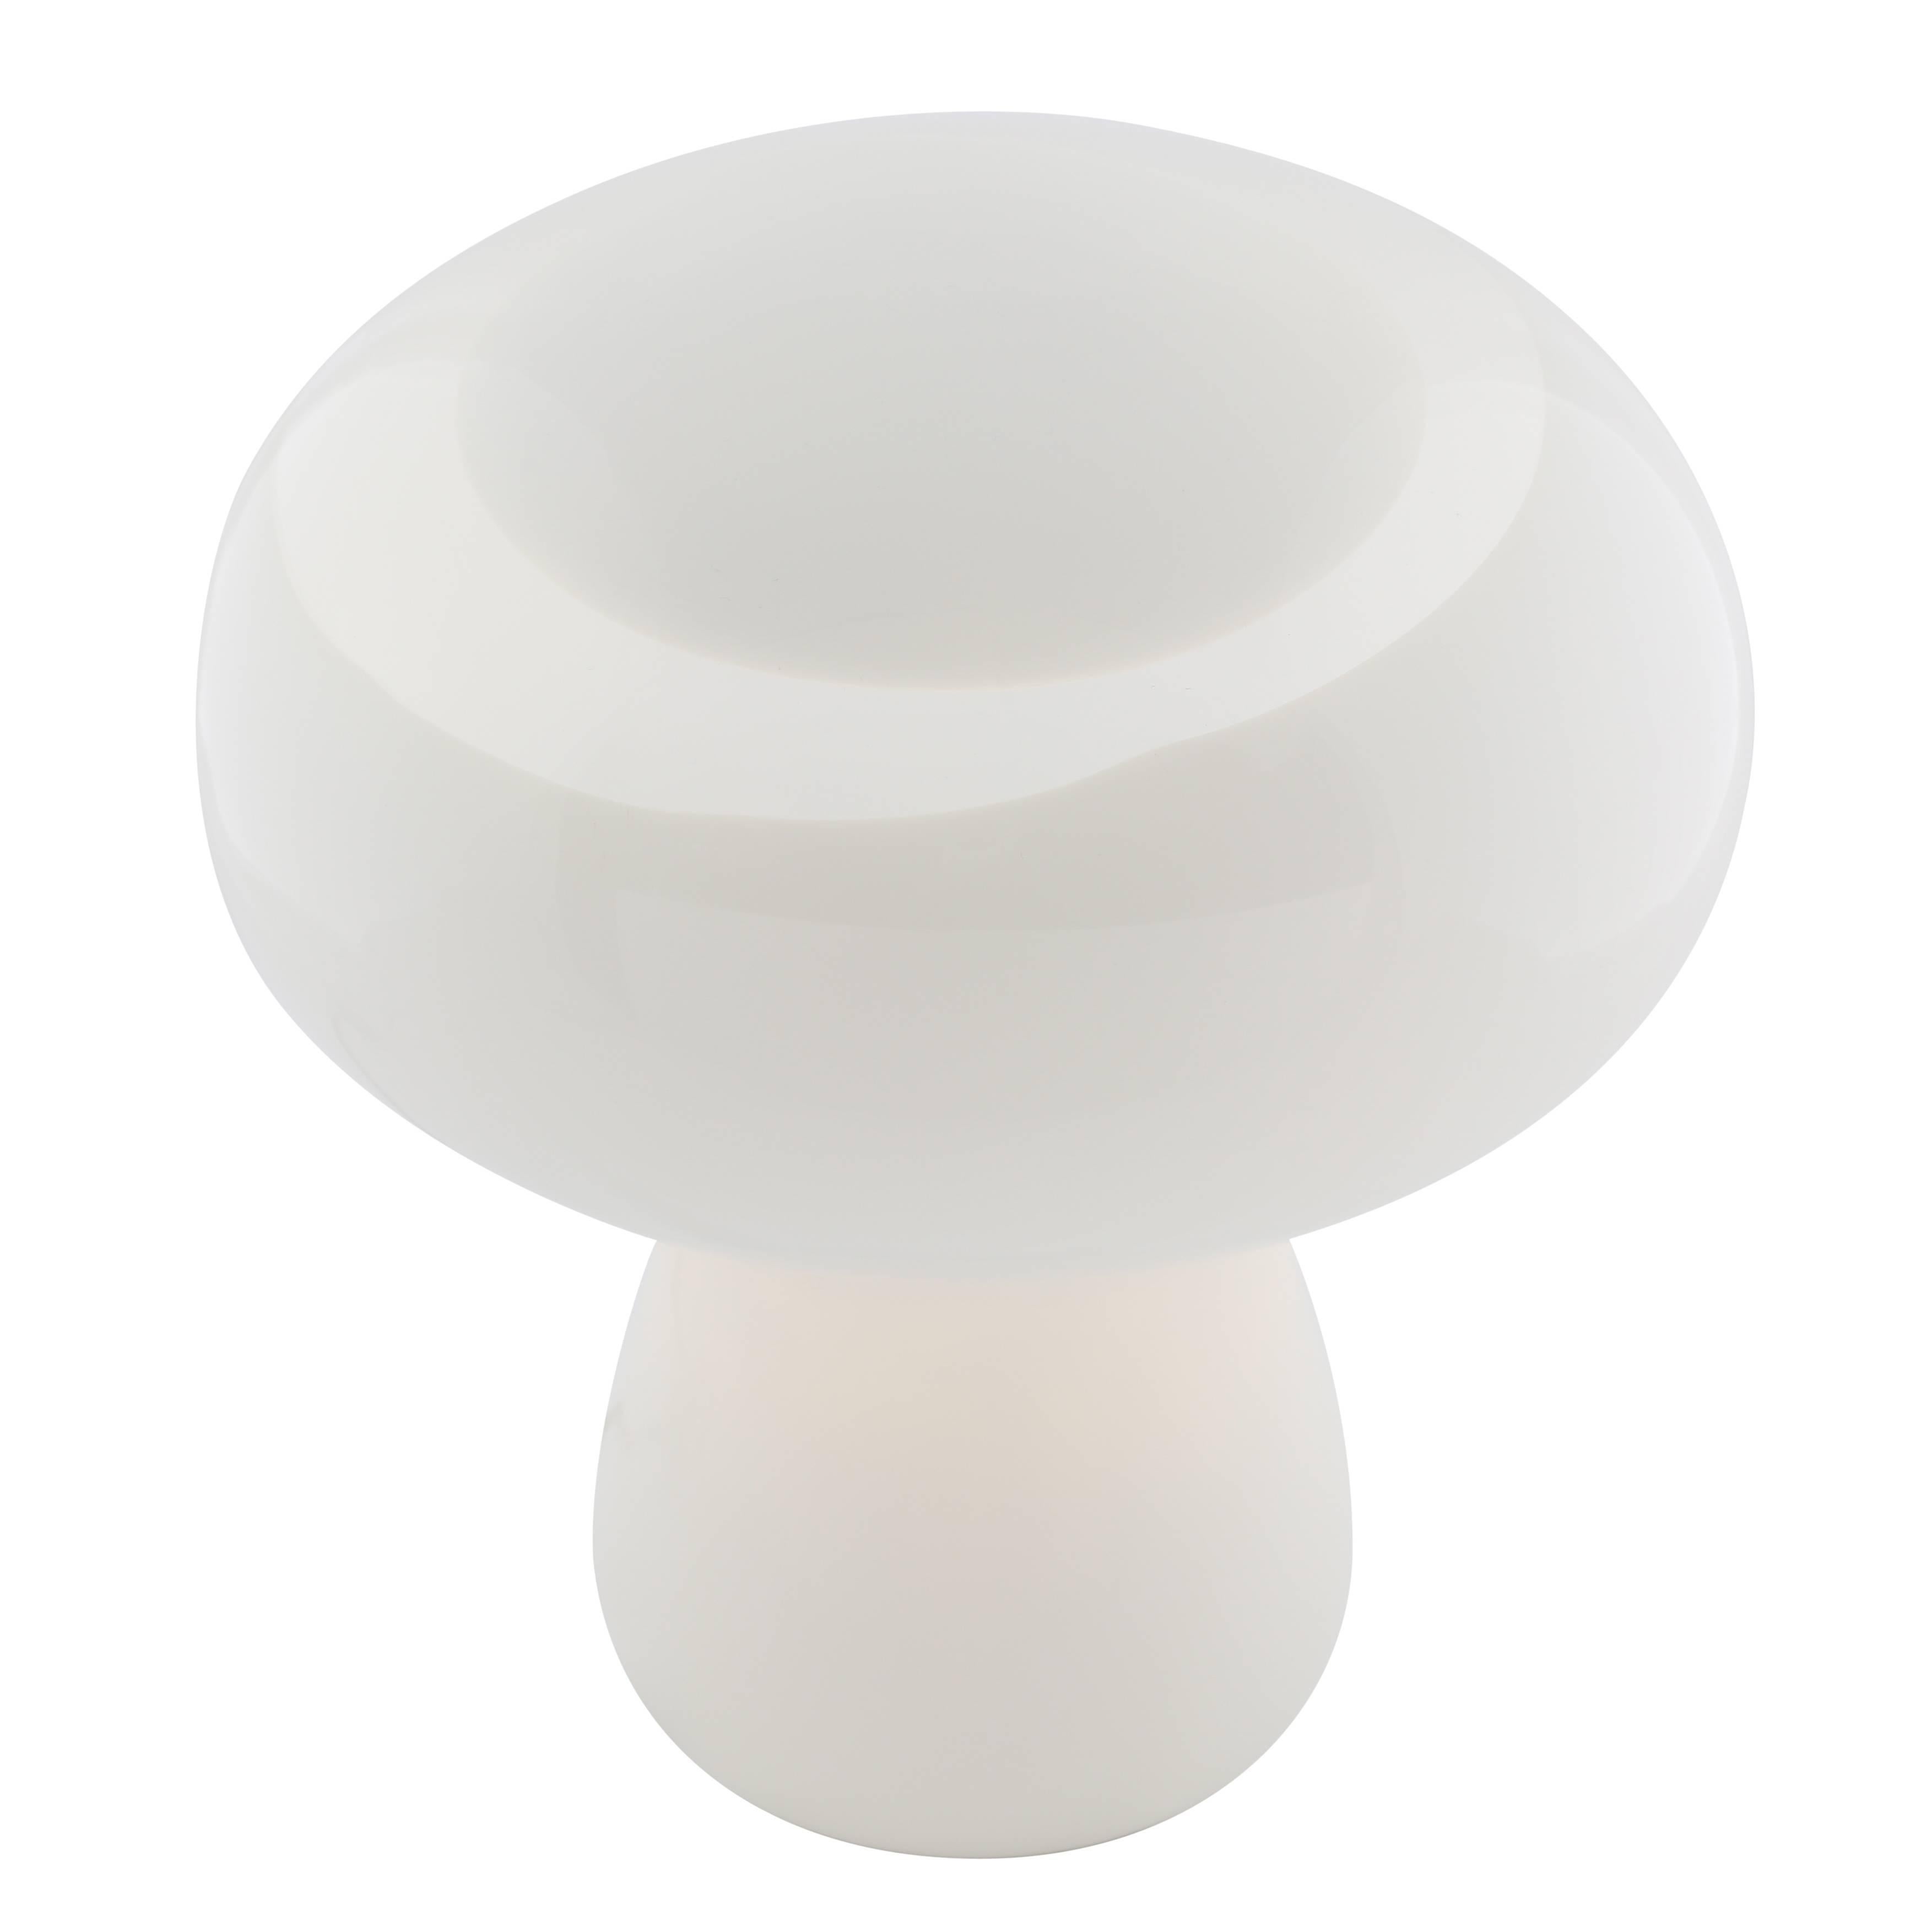 Versatile and stylish 1970s accent lamp in a rounded mushroom form. White glass with a clear swirl at the top, giving it added interest. Takes a single standard-base bulb, 40 watts maximum. Switch on cord. 

See this item in our Brooklyn showroom,